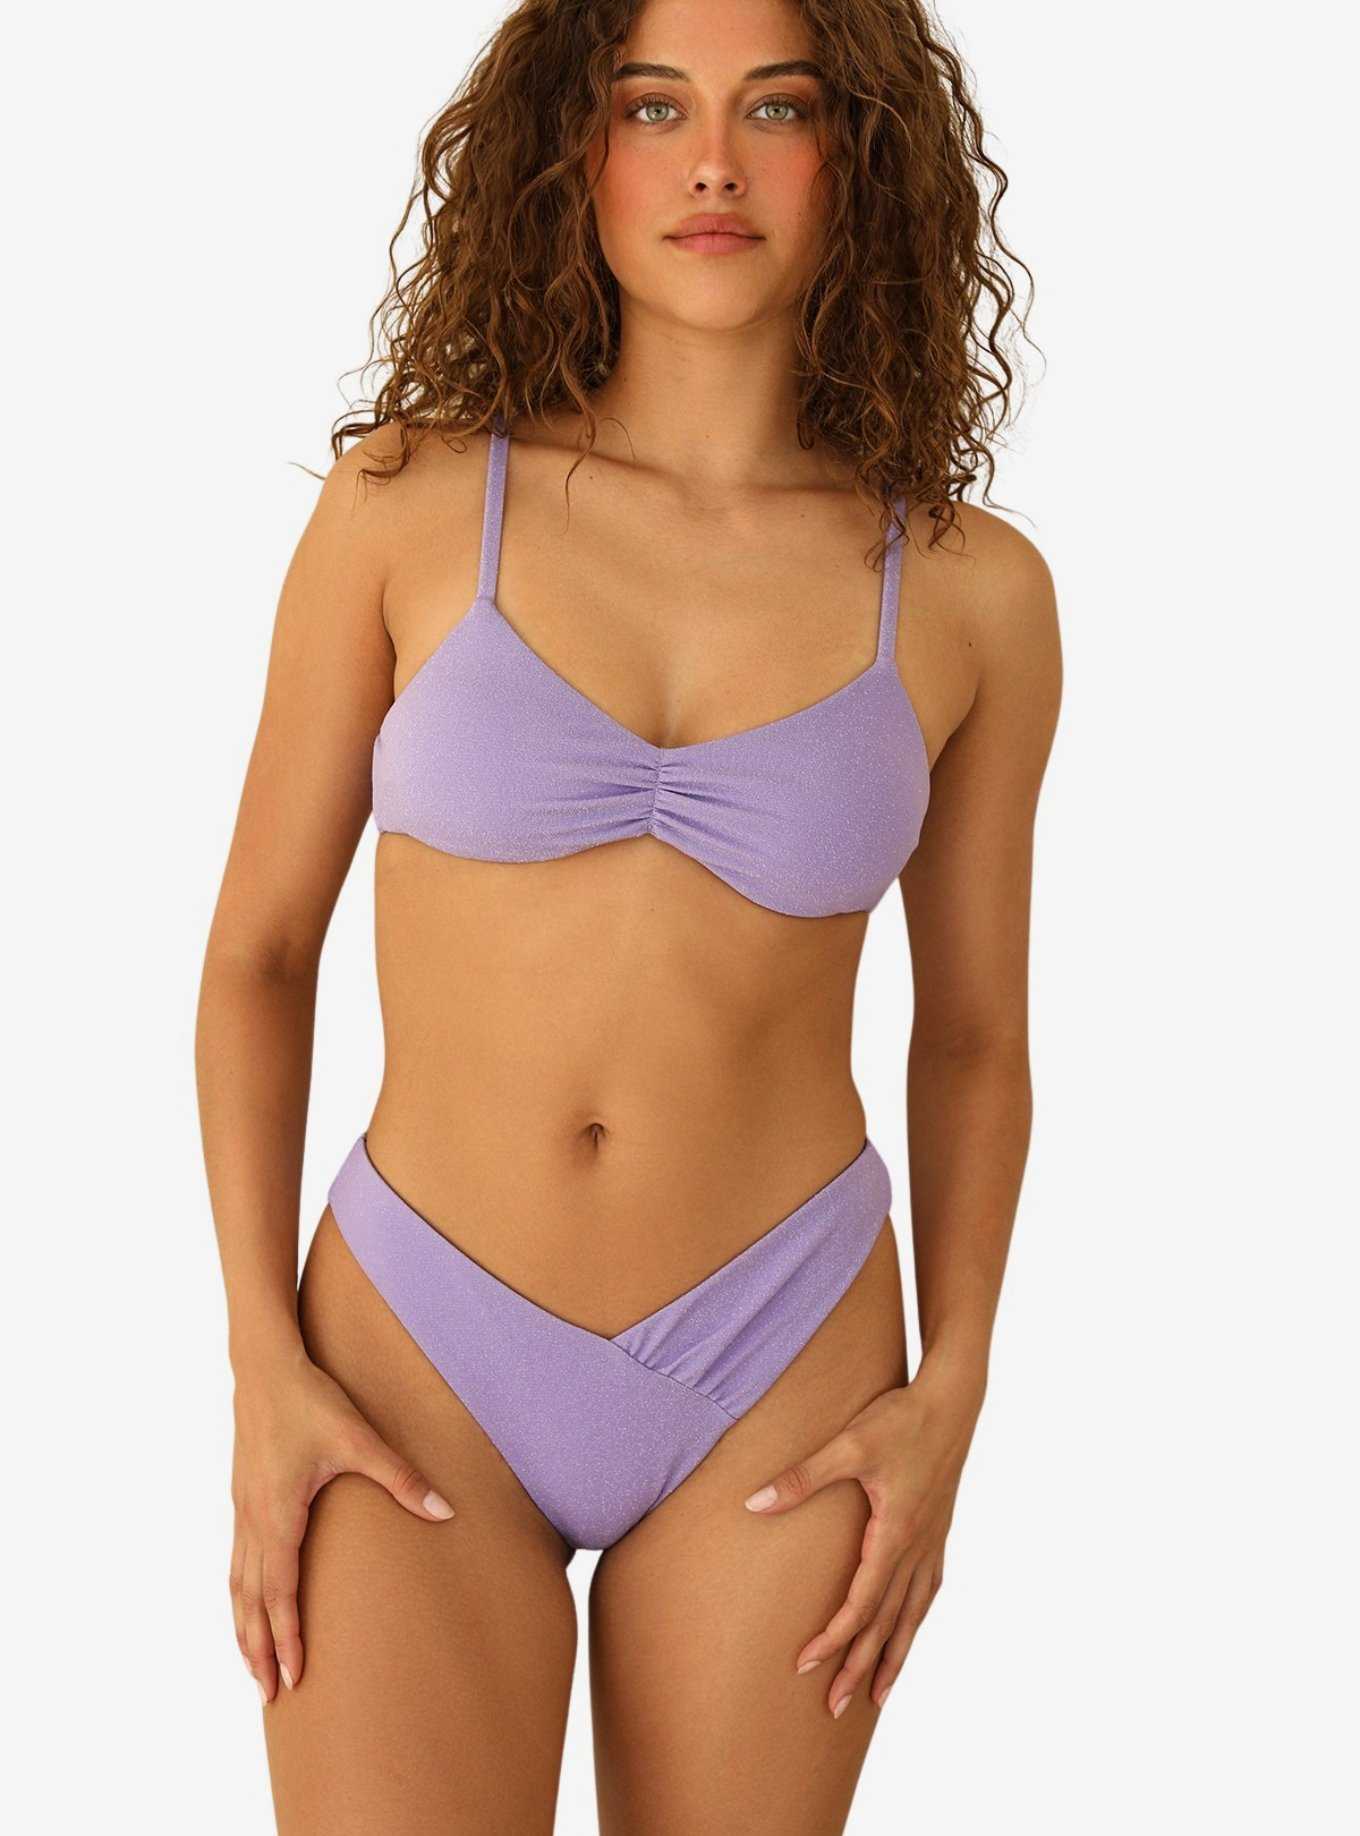 Dippin' Daisy's Angel Swim Bottom Bedazzled Lilac, , hi-res